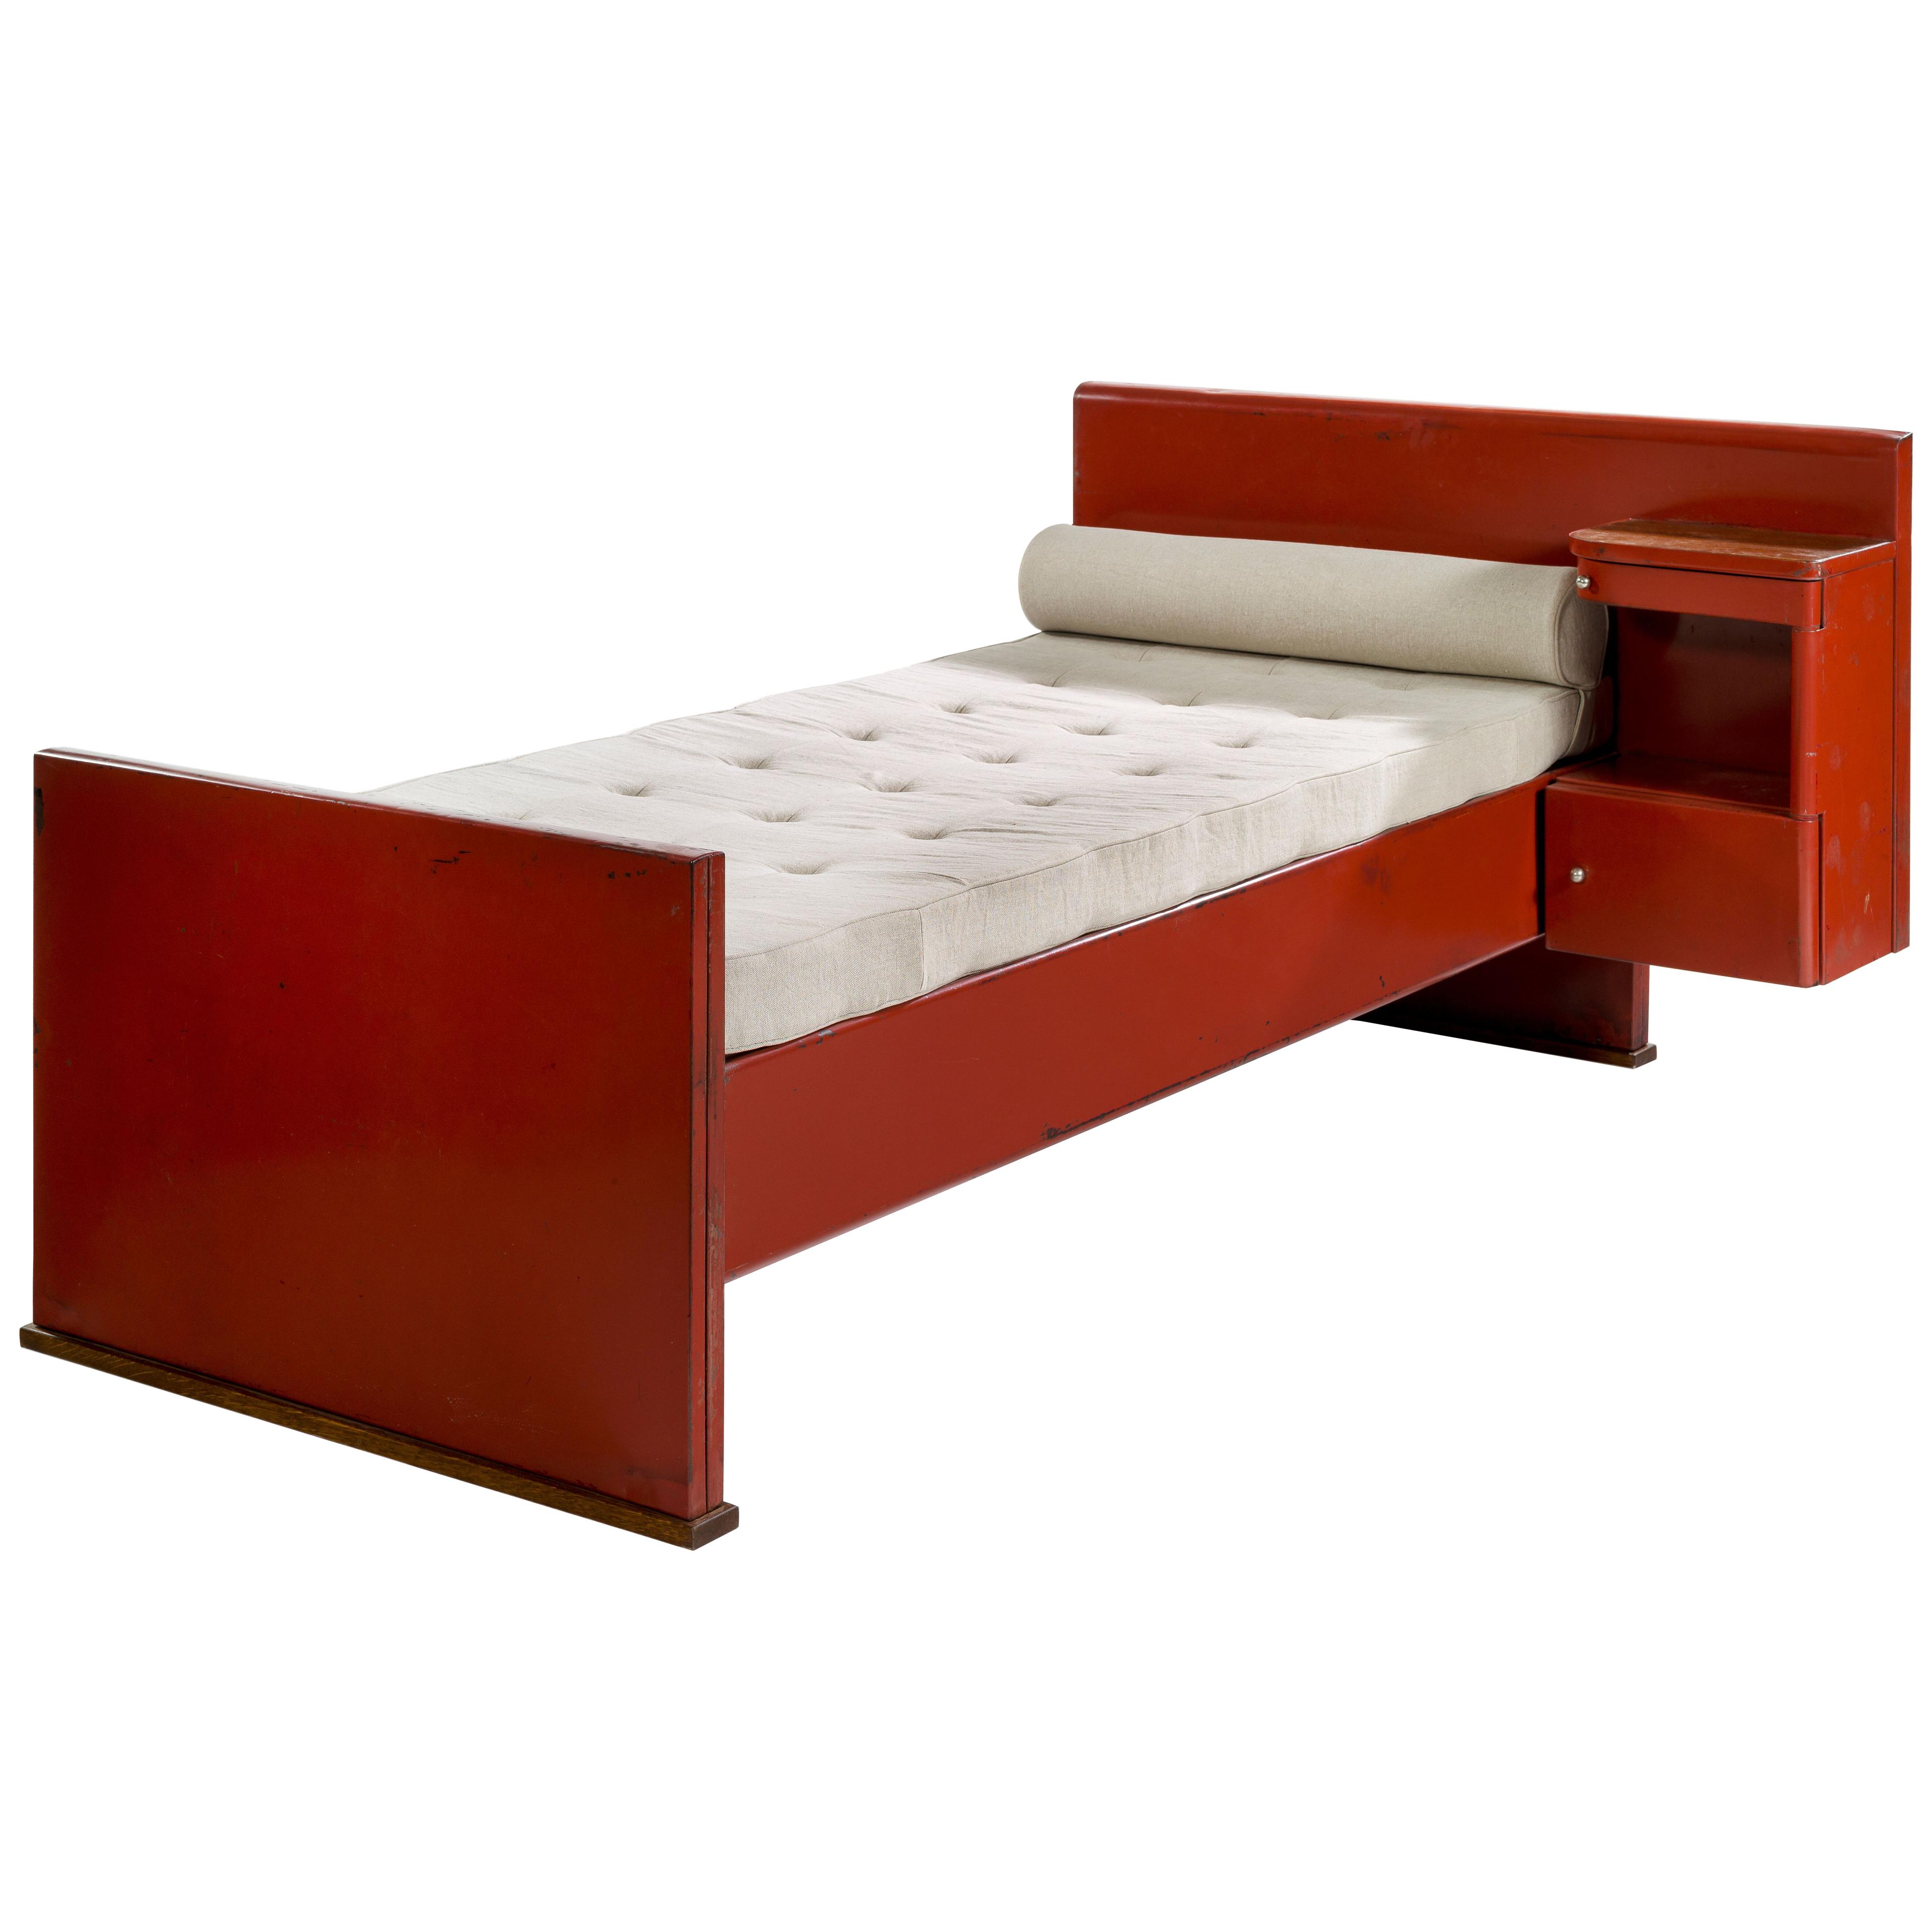 Bed by Jean Prouvé, 1934 - 1935.